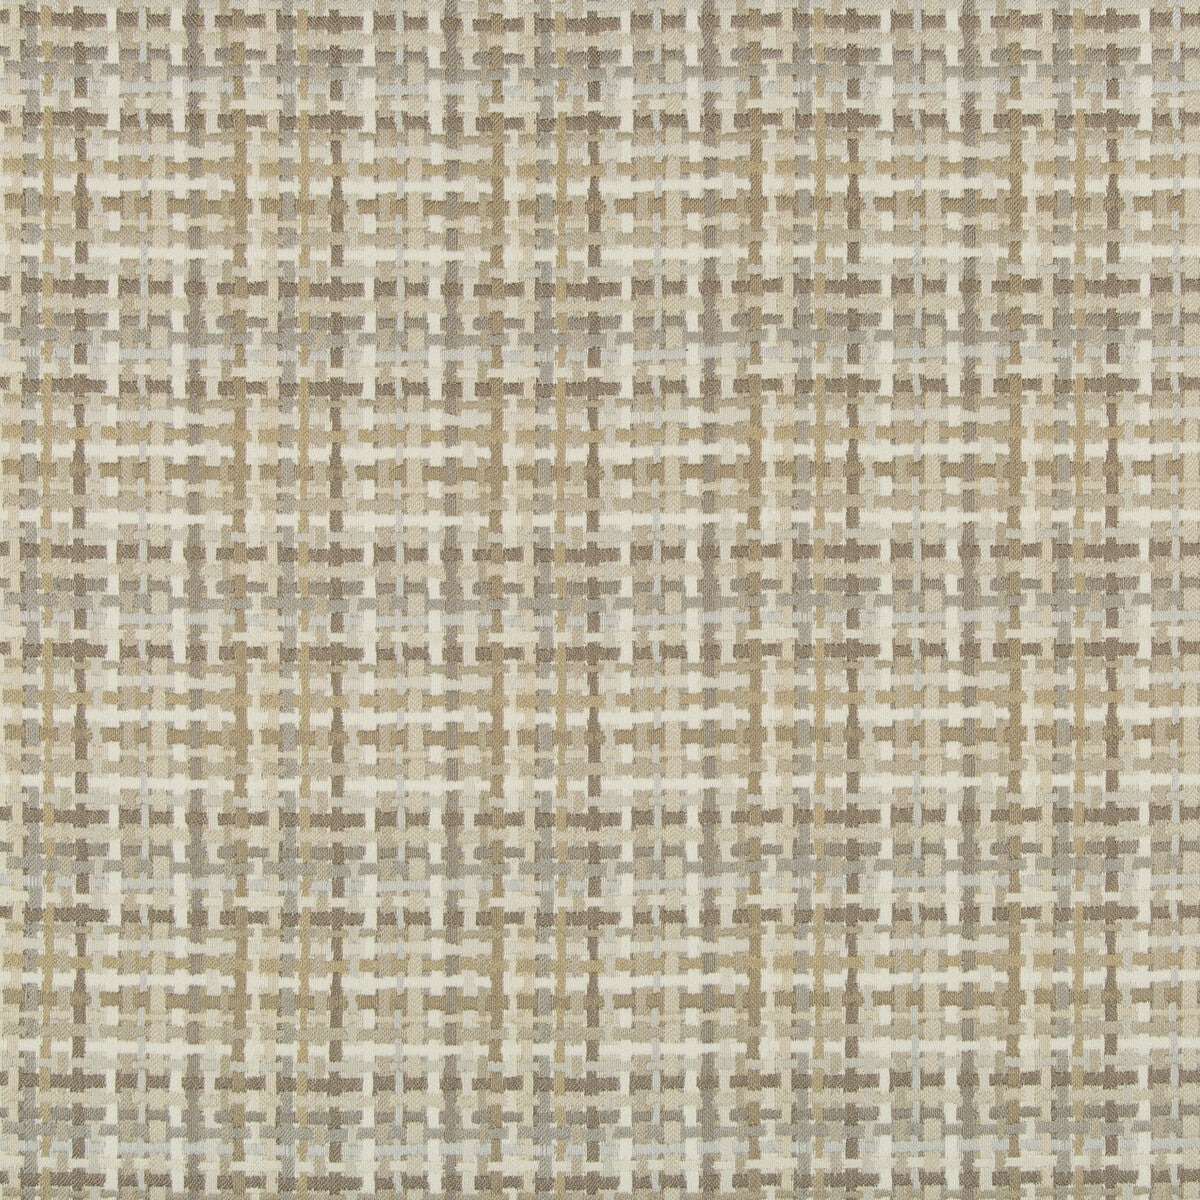 Kravet Design fabric in 35598-16 color - pattern 35598.16.0 - by Kravet Design in the Woven Colors collection